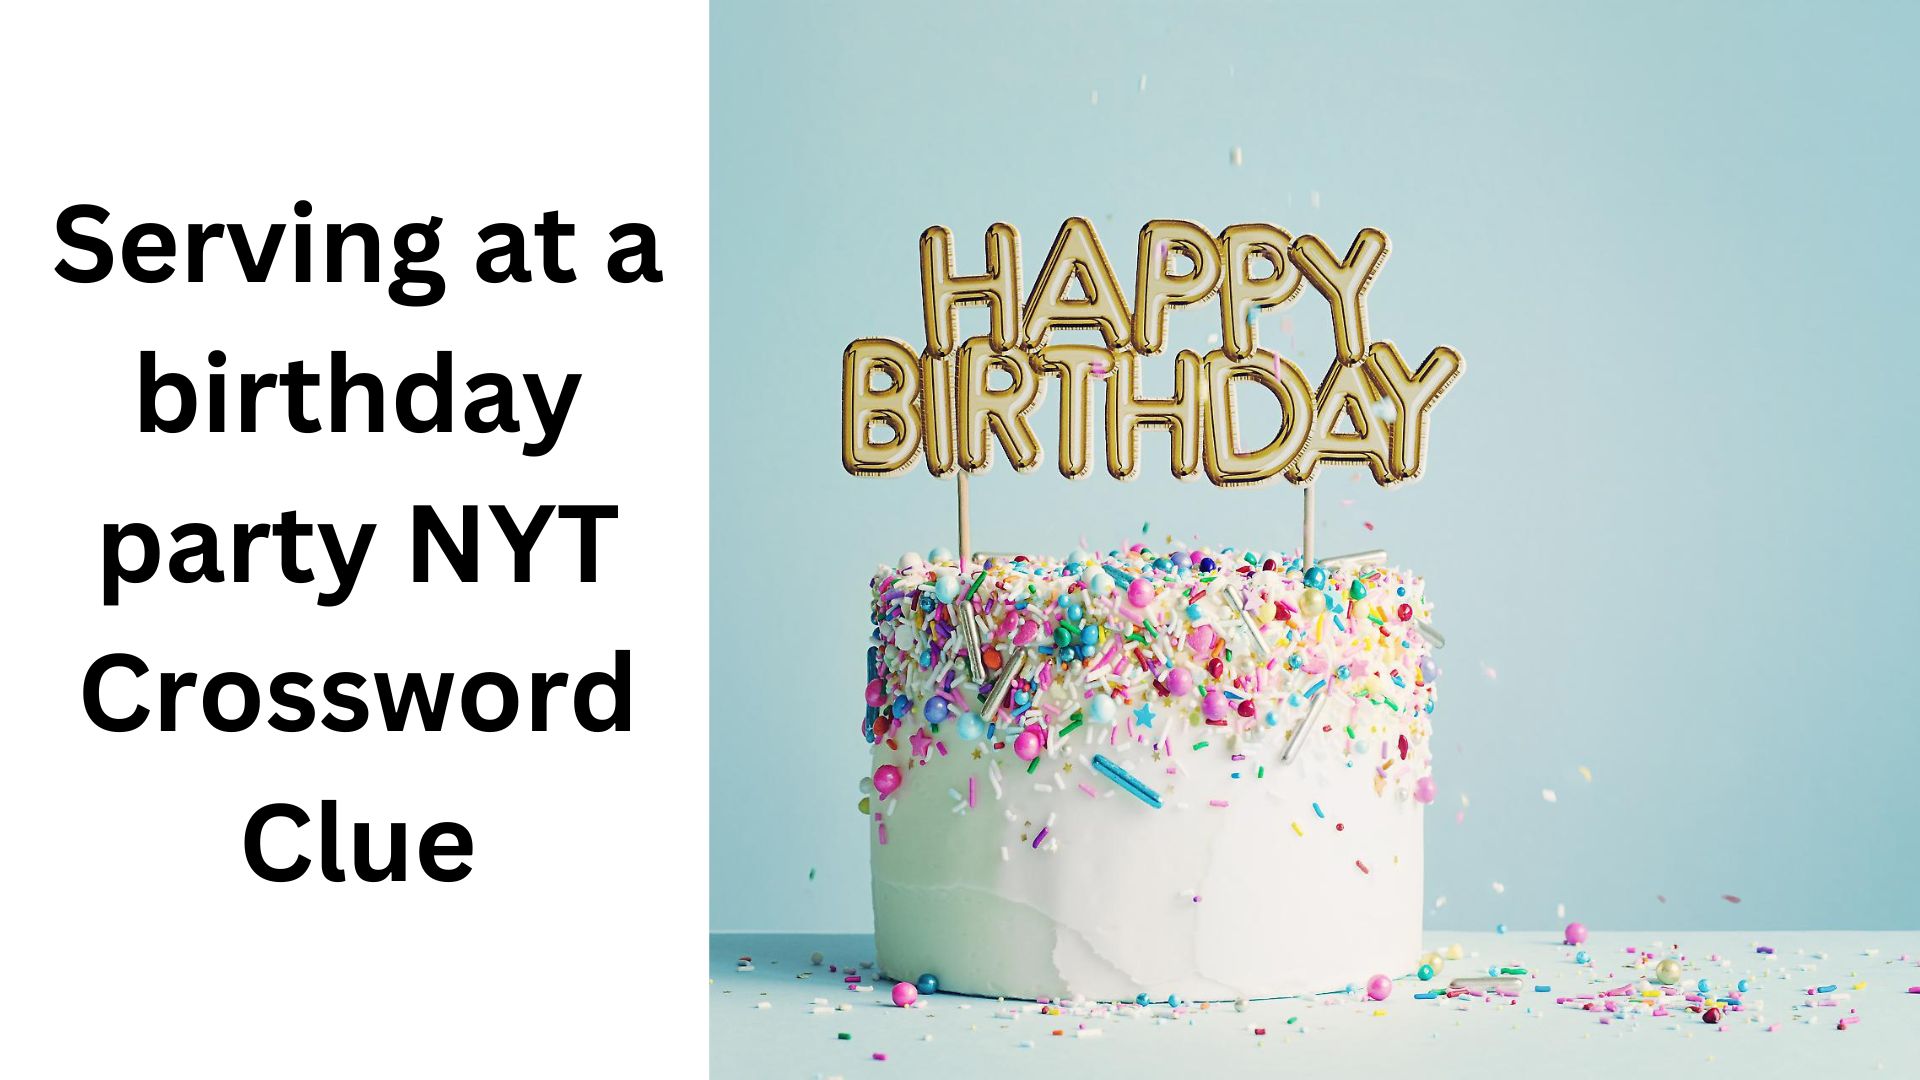 Serving at a birthday party NYT Crossword Clue